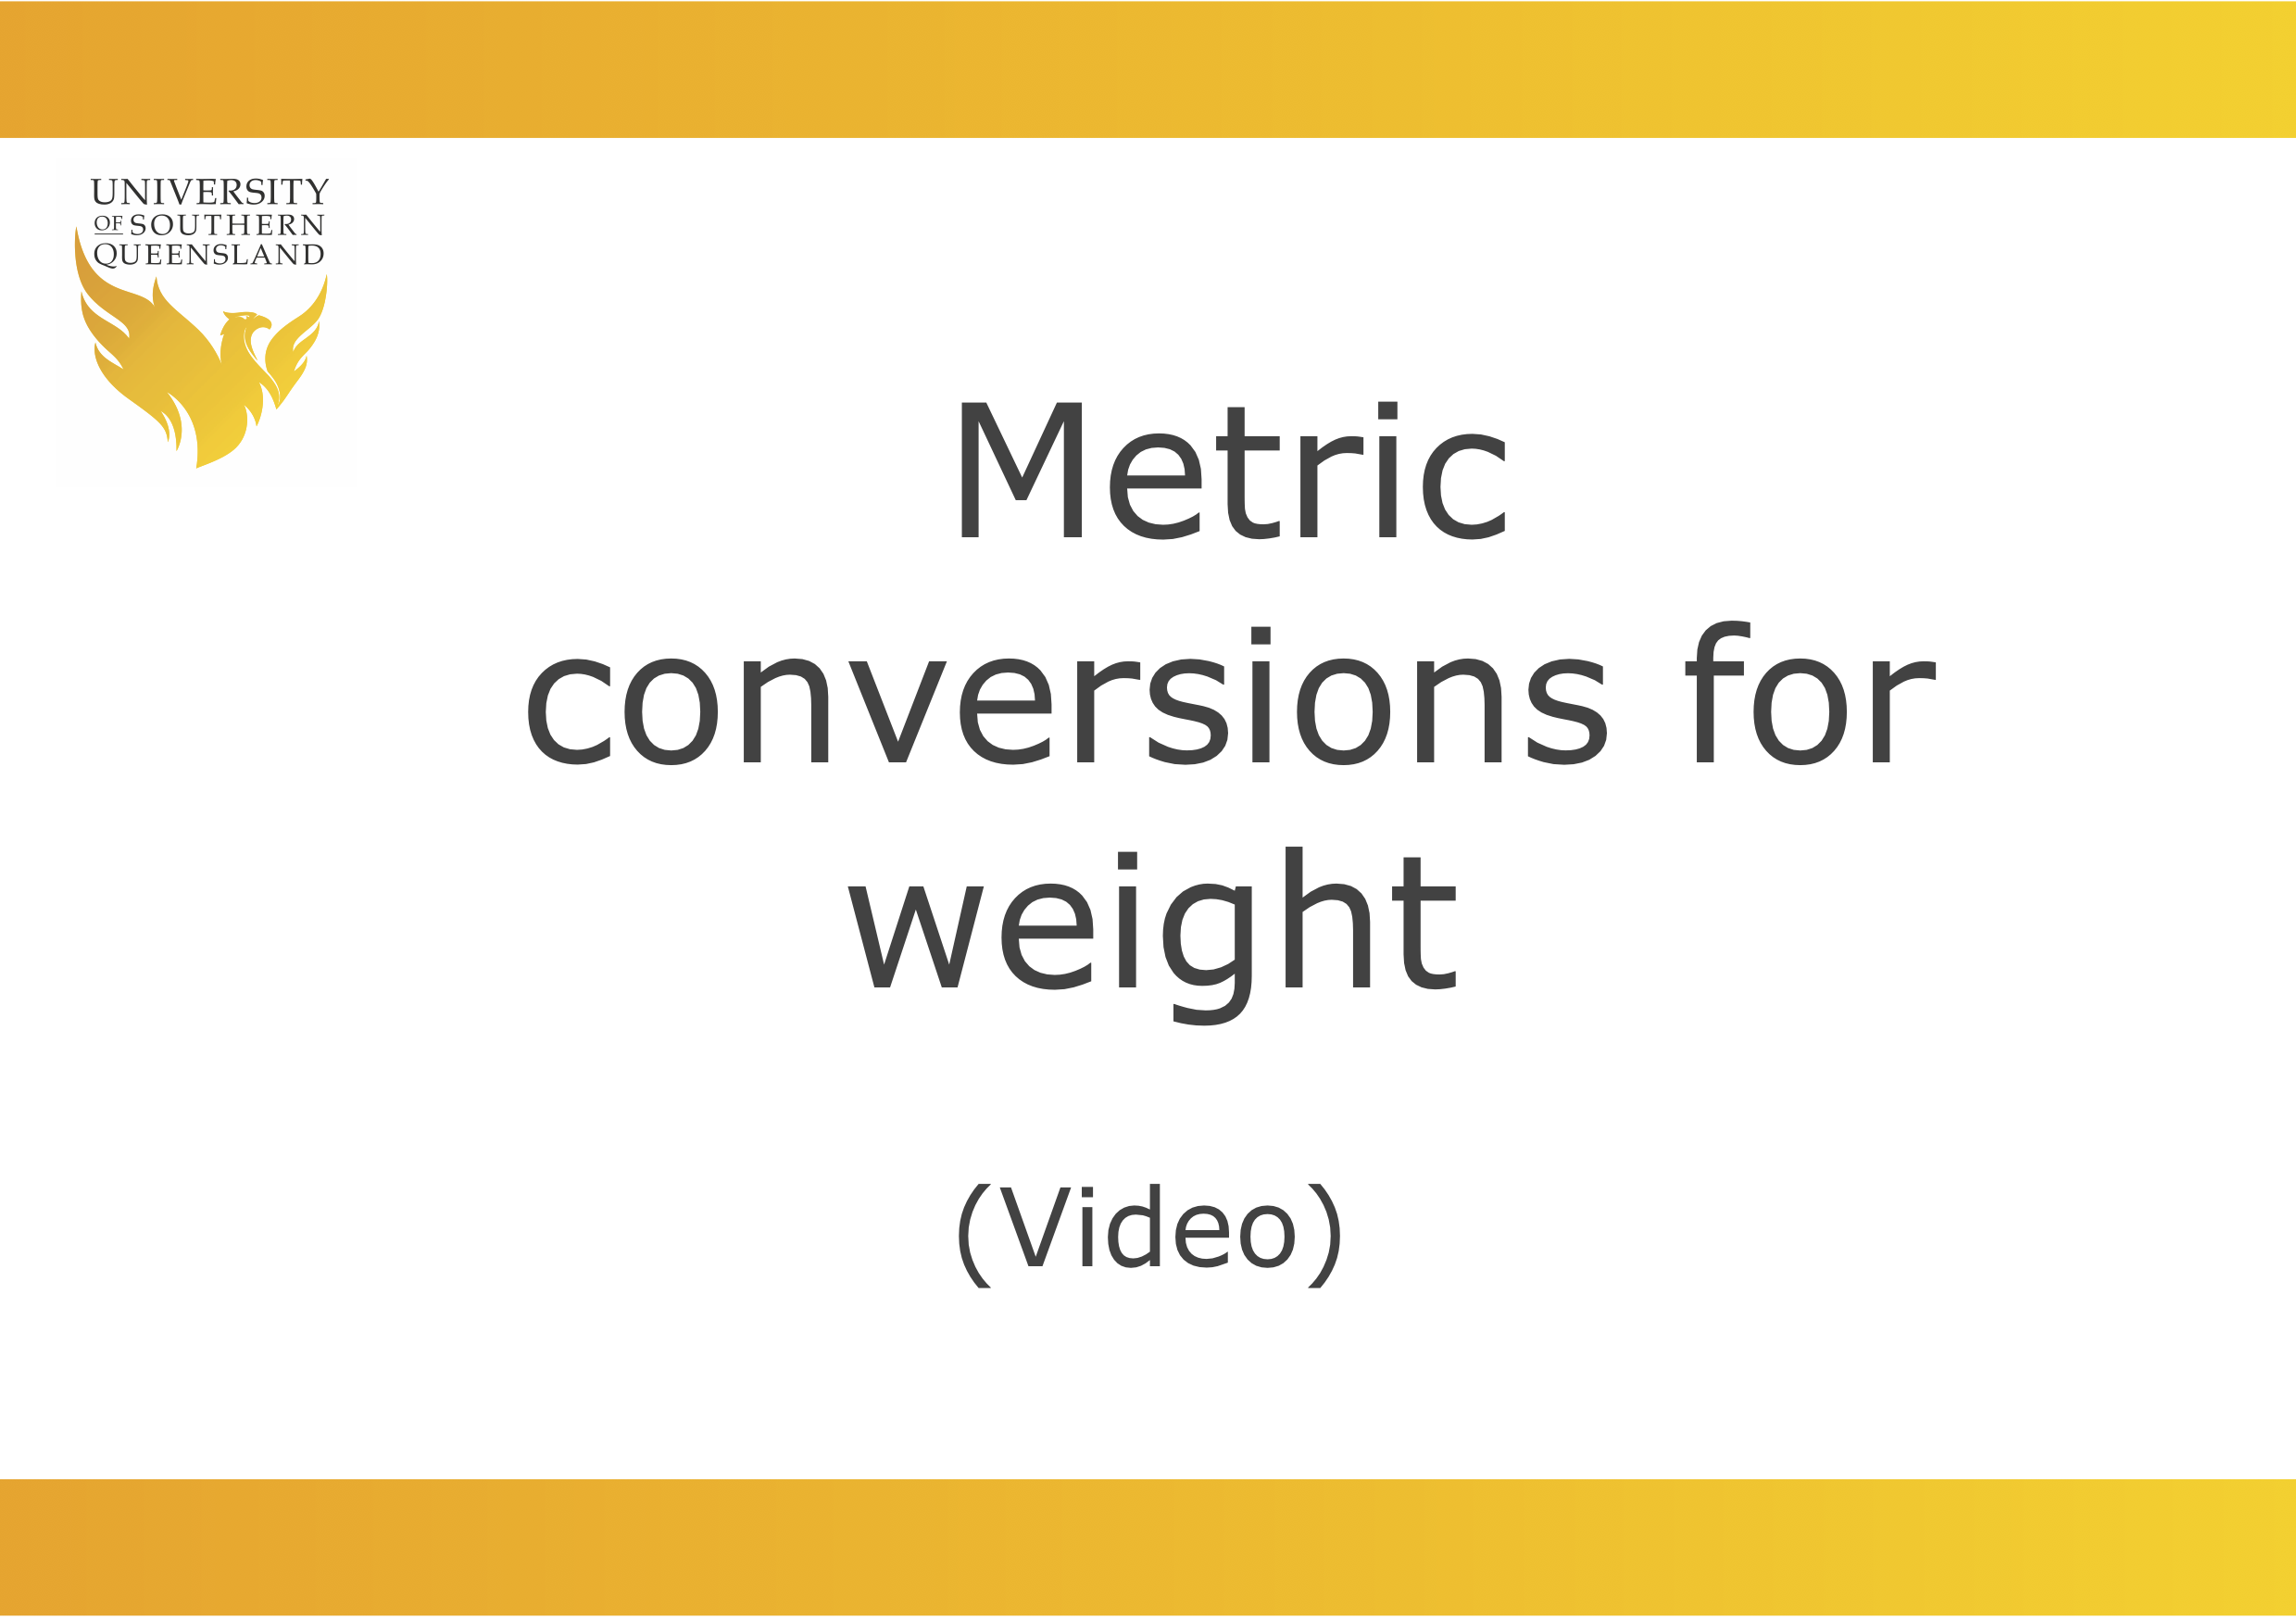 Video link for metric conversions for weight.